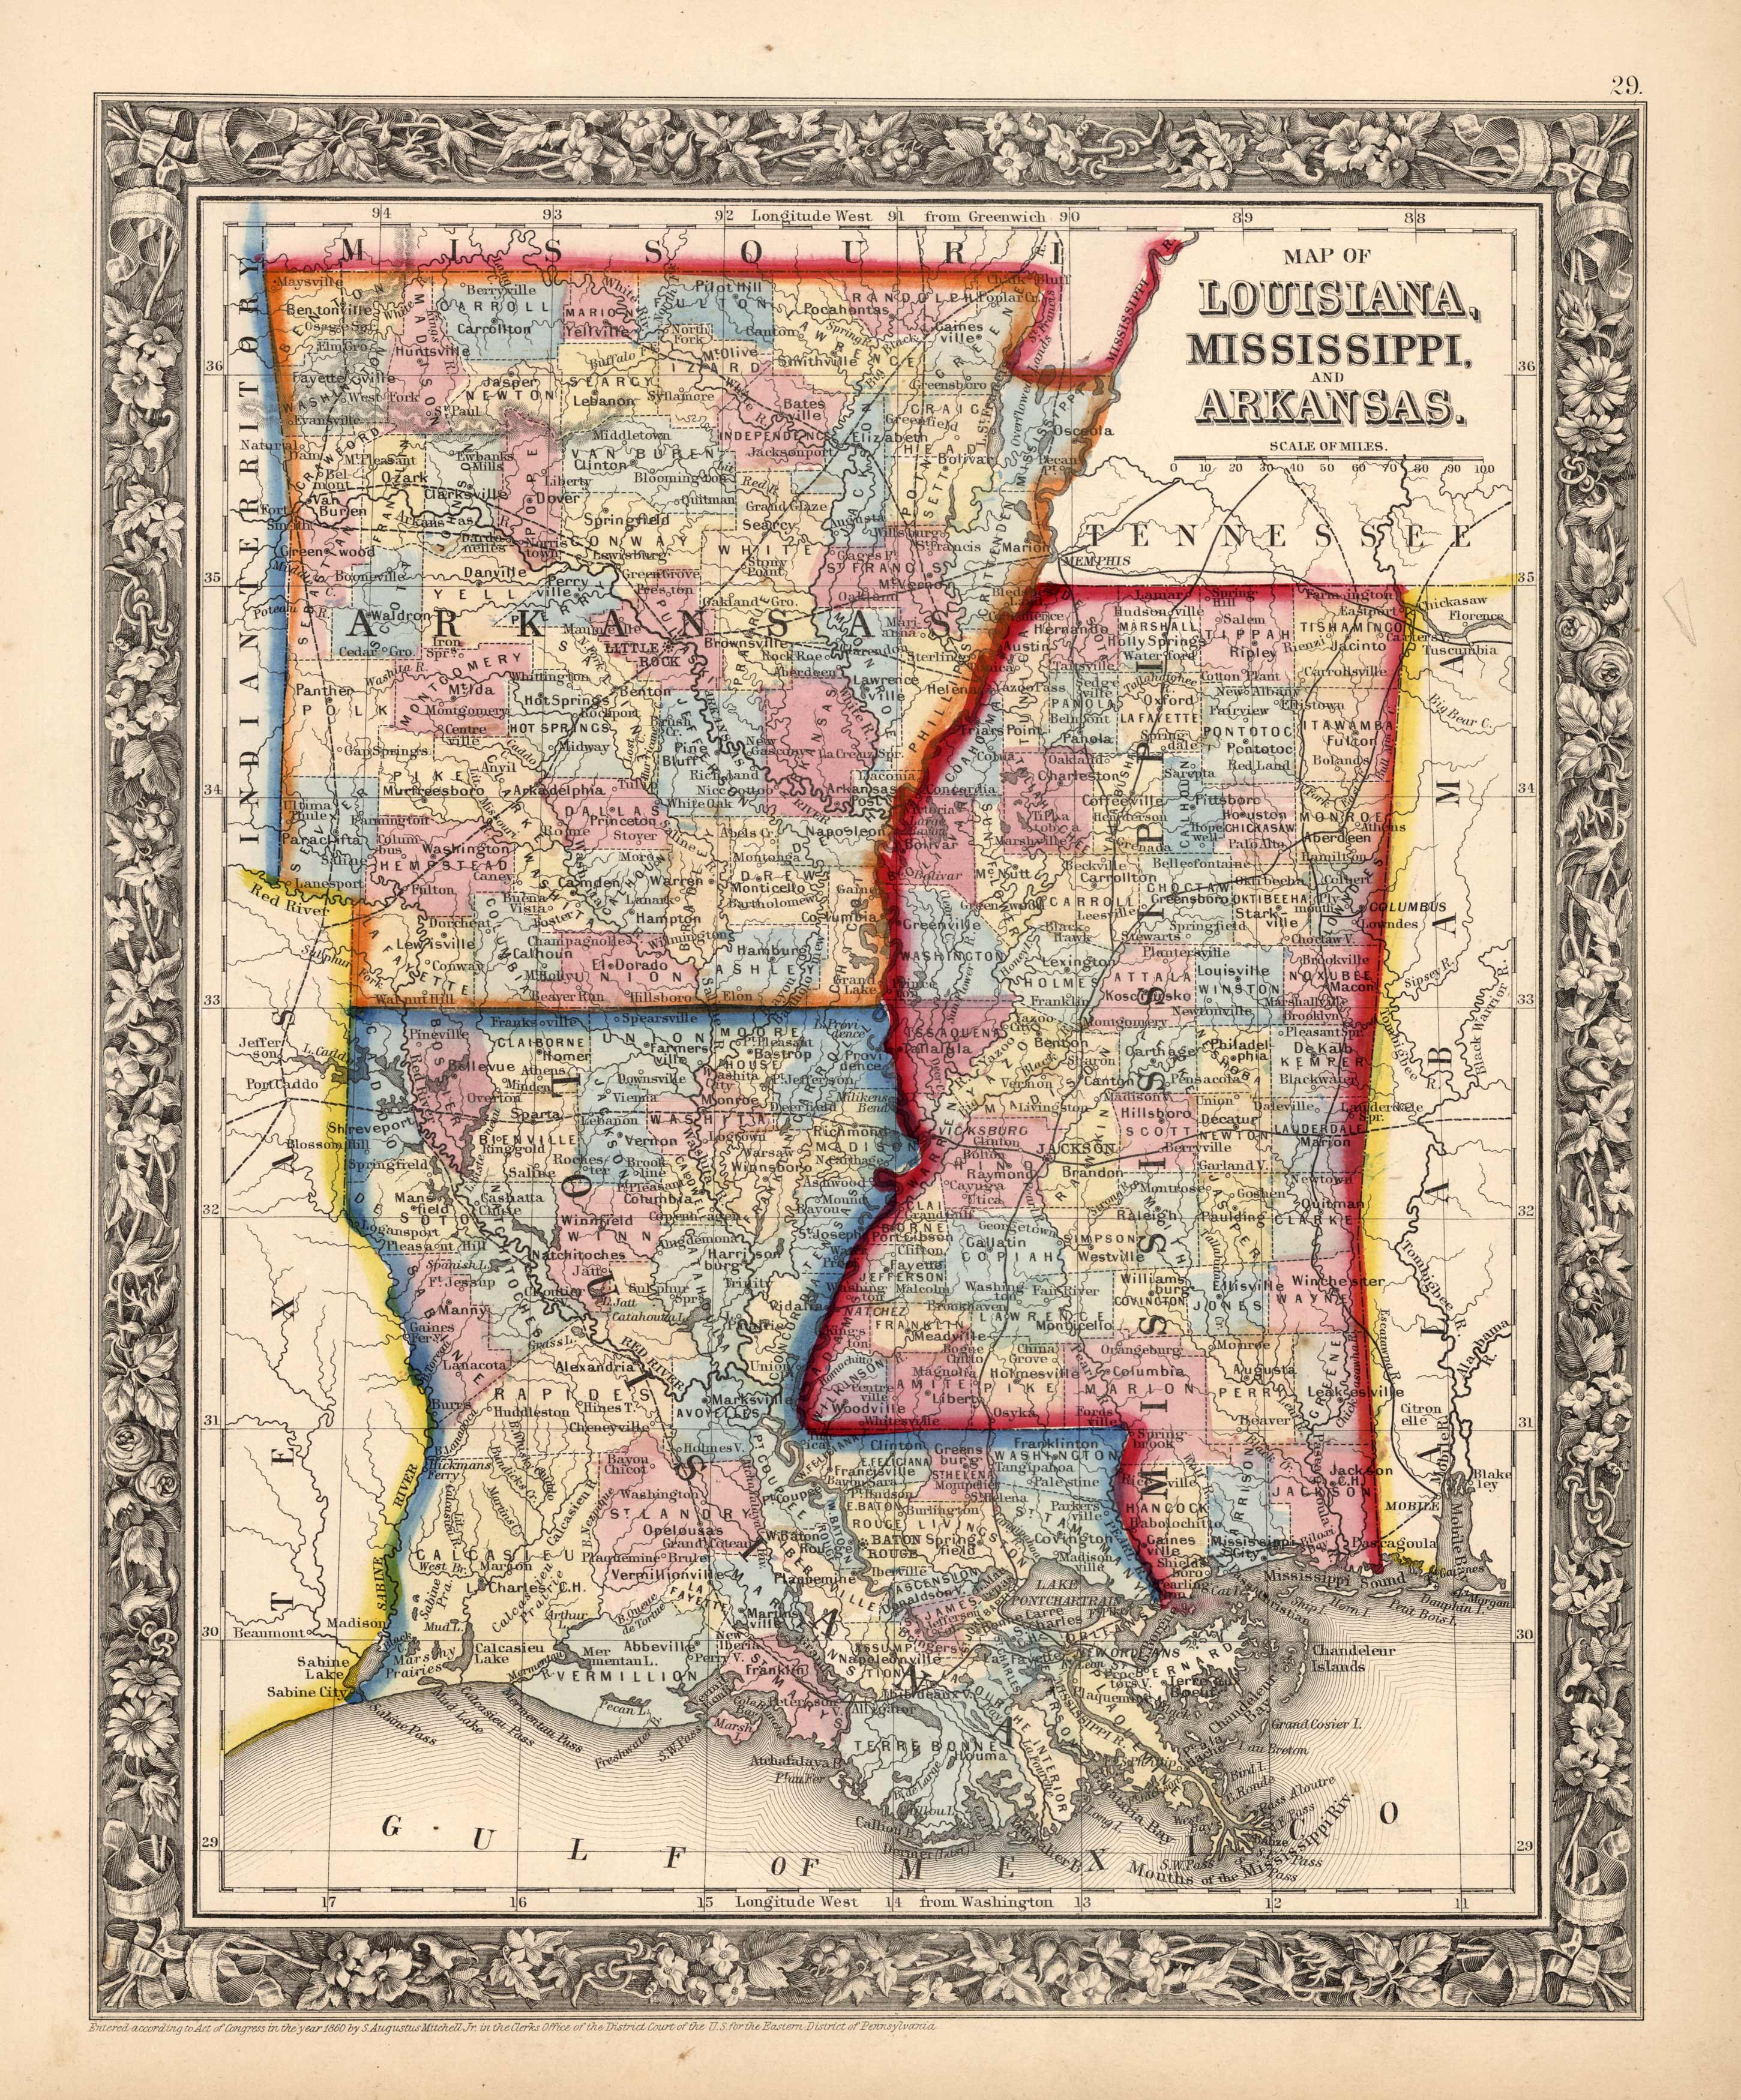 New Rail Road and County Map of Arkansas, Louisiana and Mississippi - Art  Source International